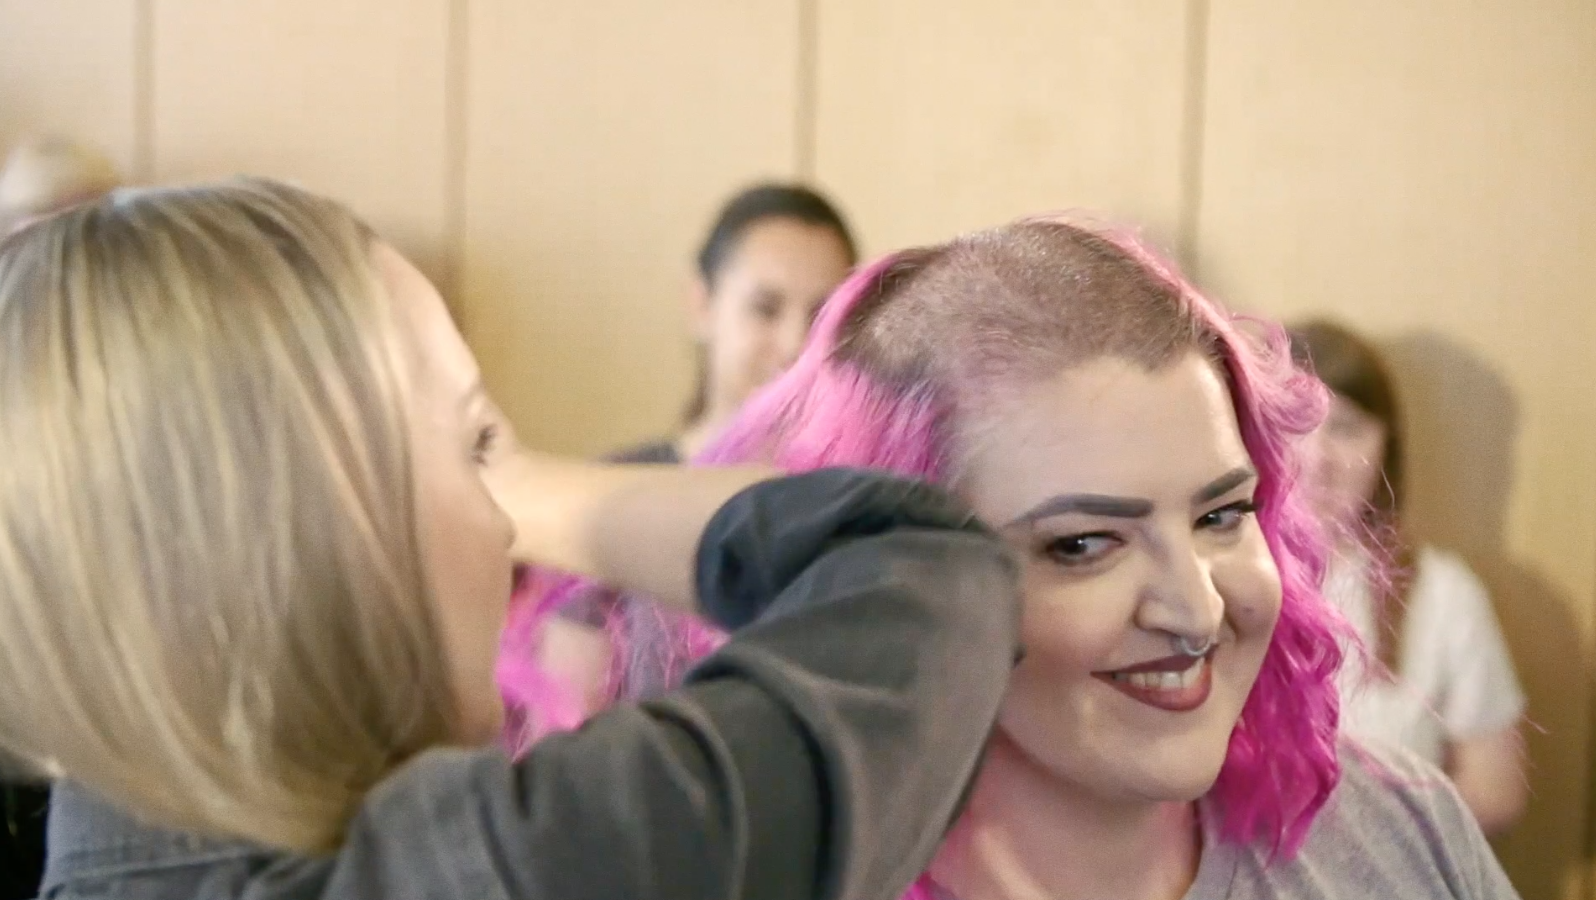 A woman with pink hair has it shaved off for charity